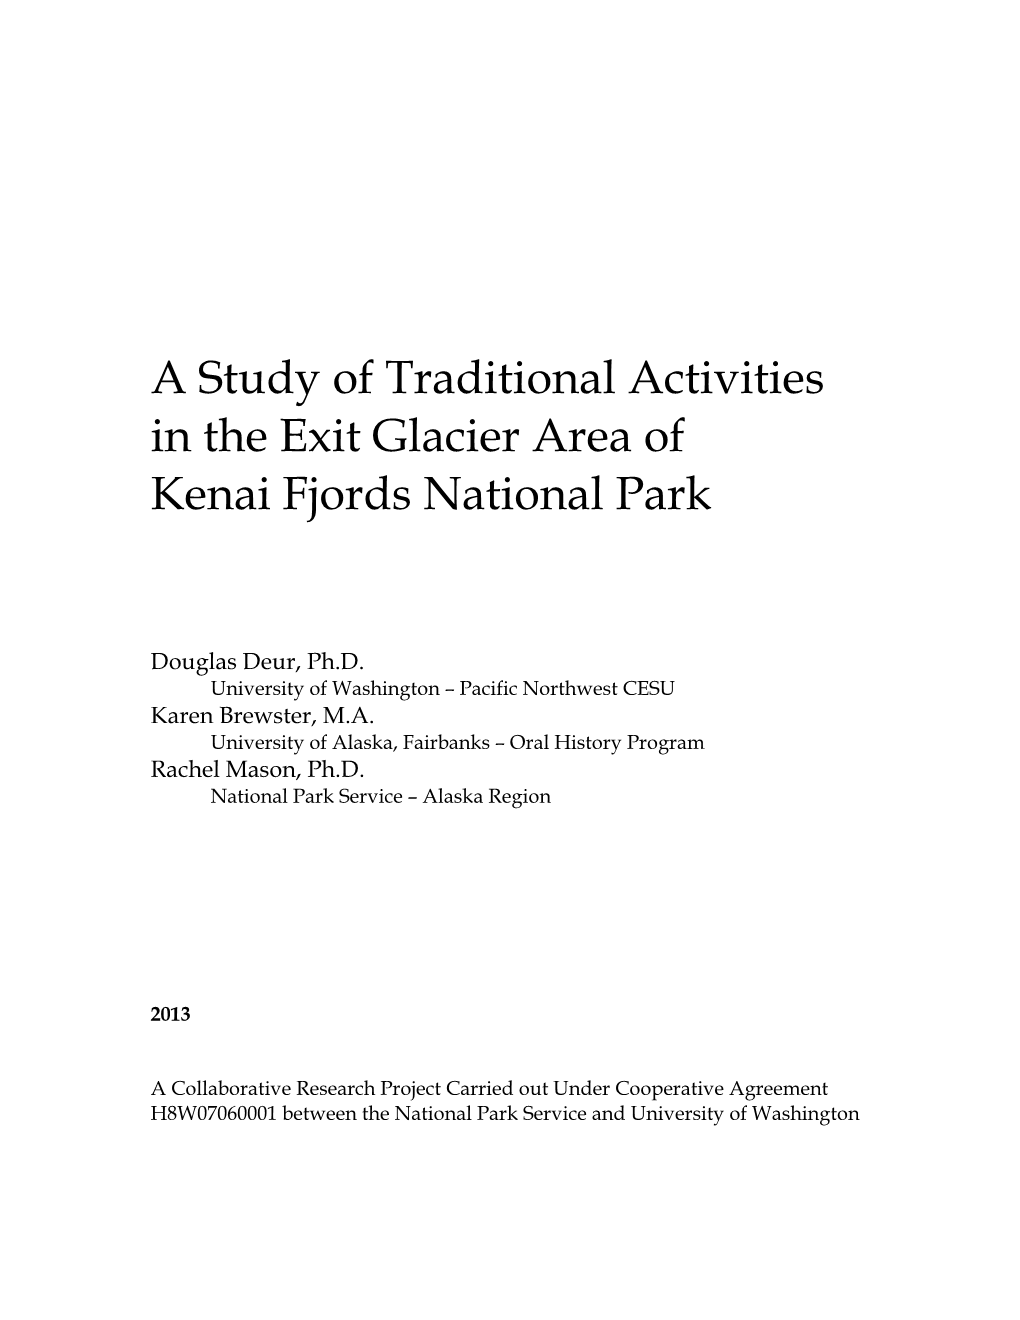 A Study of Traditional Activities in the Exit Glacier Area of Kenai Fjords National Park